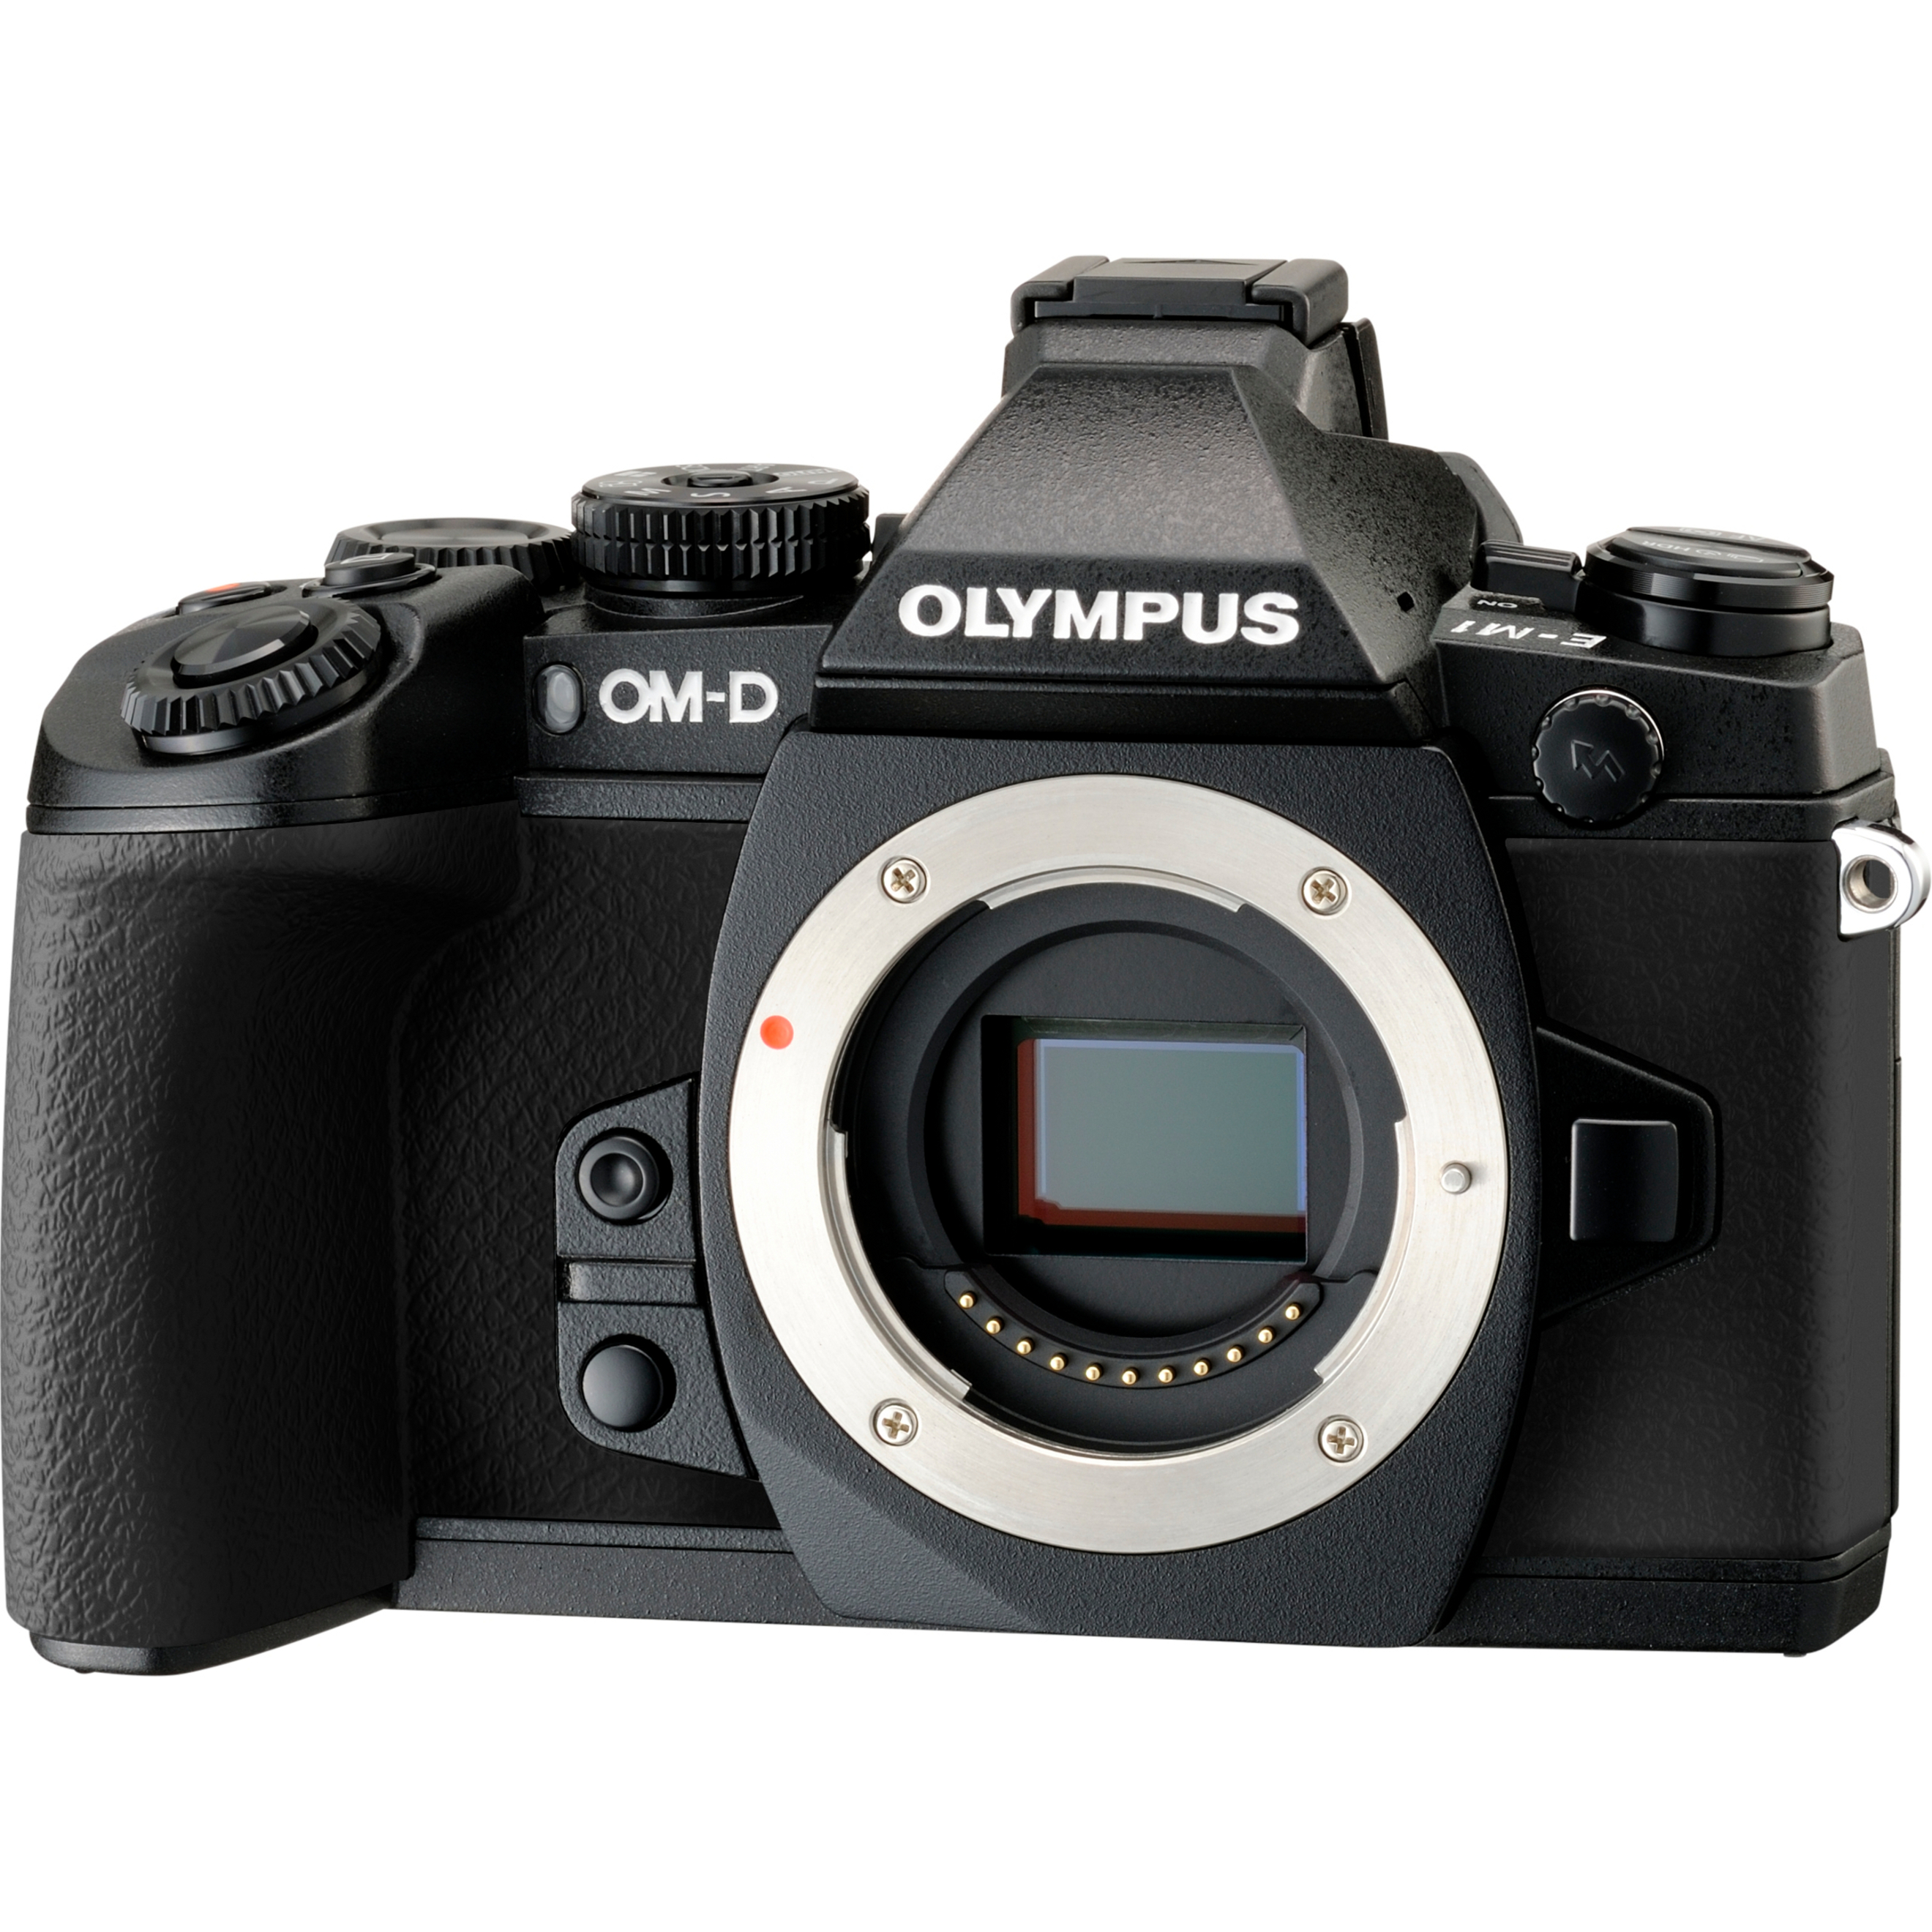 Olympus OM-D E-M1 16.3 Megapixel Mirrorless Camera Body Only, Black - image 2 of 2